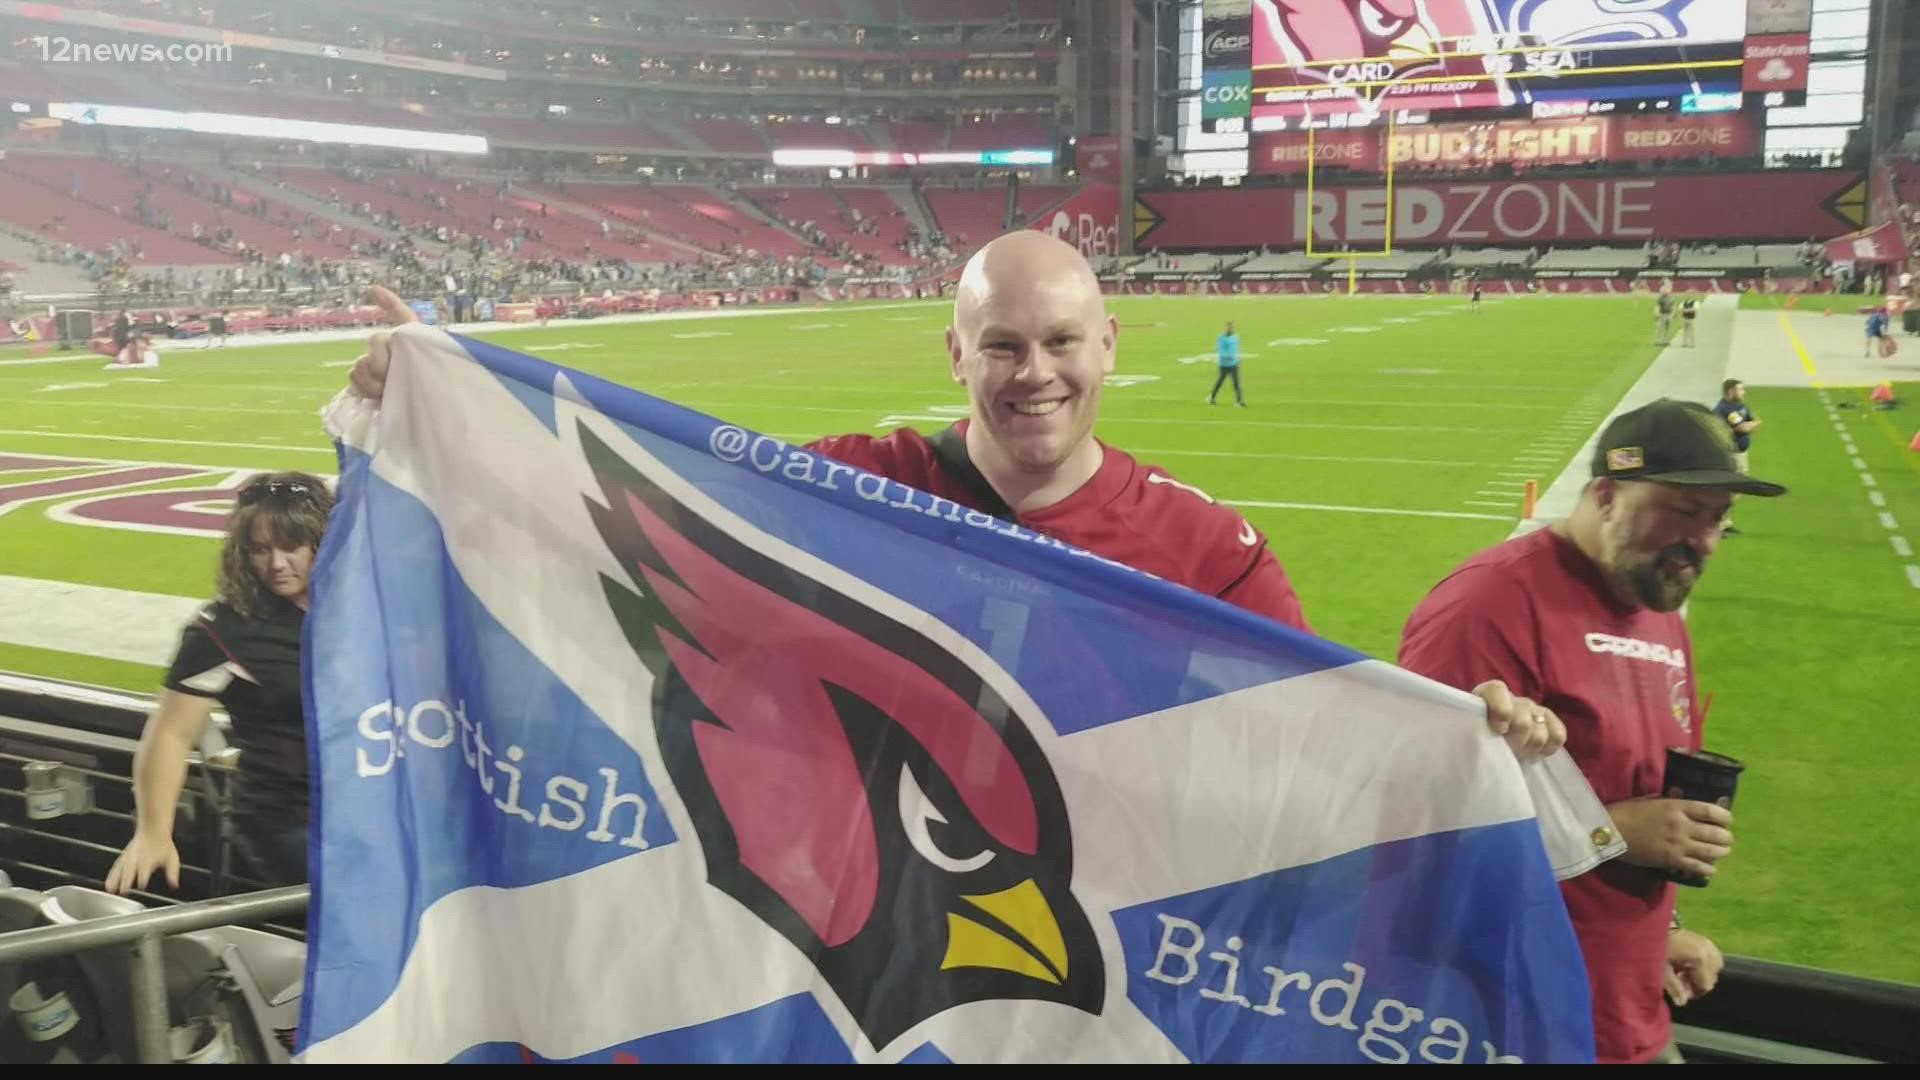 There are British Birdgang, German Birdgang and Australian Birdgang members, but over the weekend many Cardinals fans met their first Scottish Birdgang member!